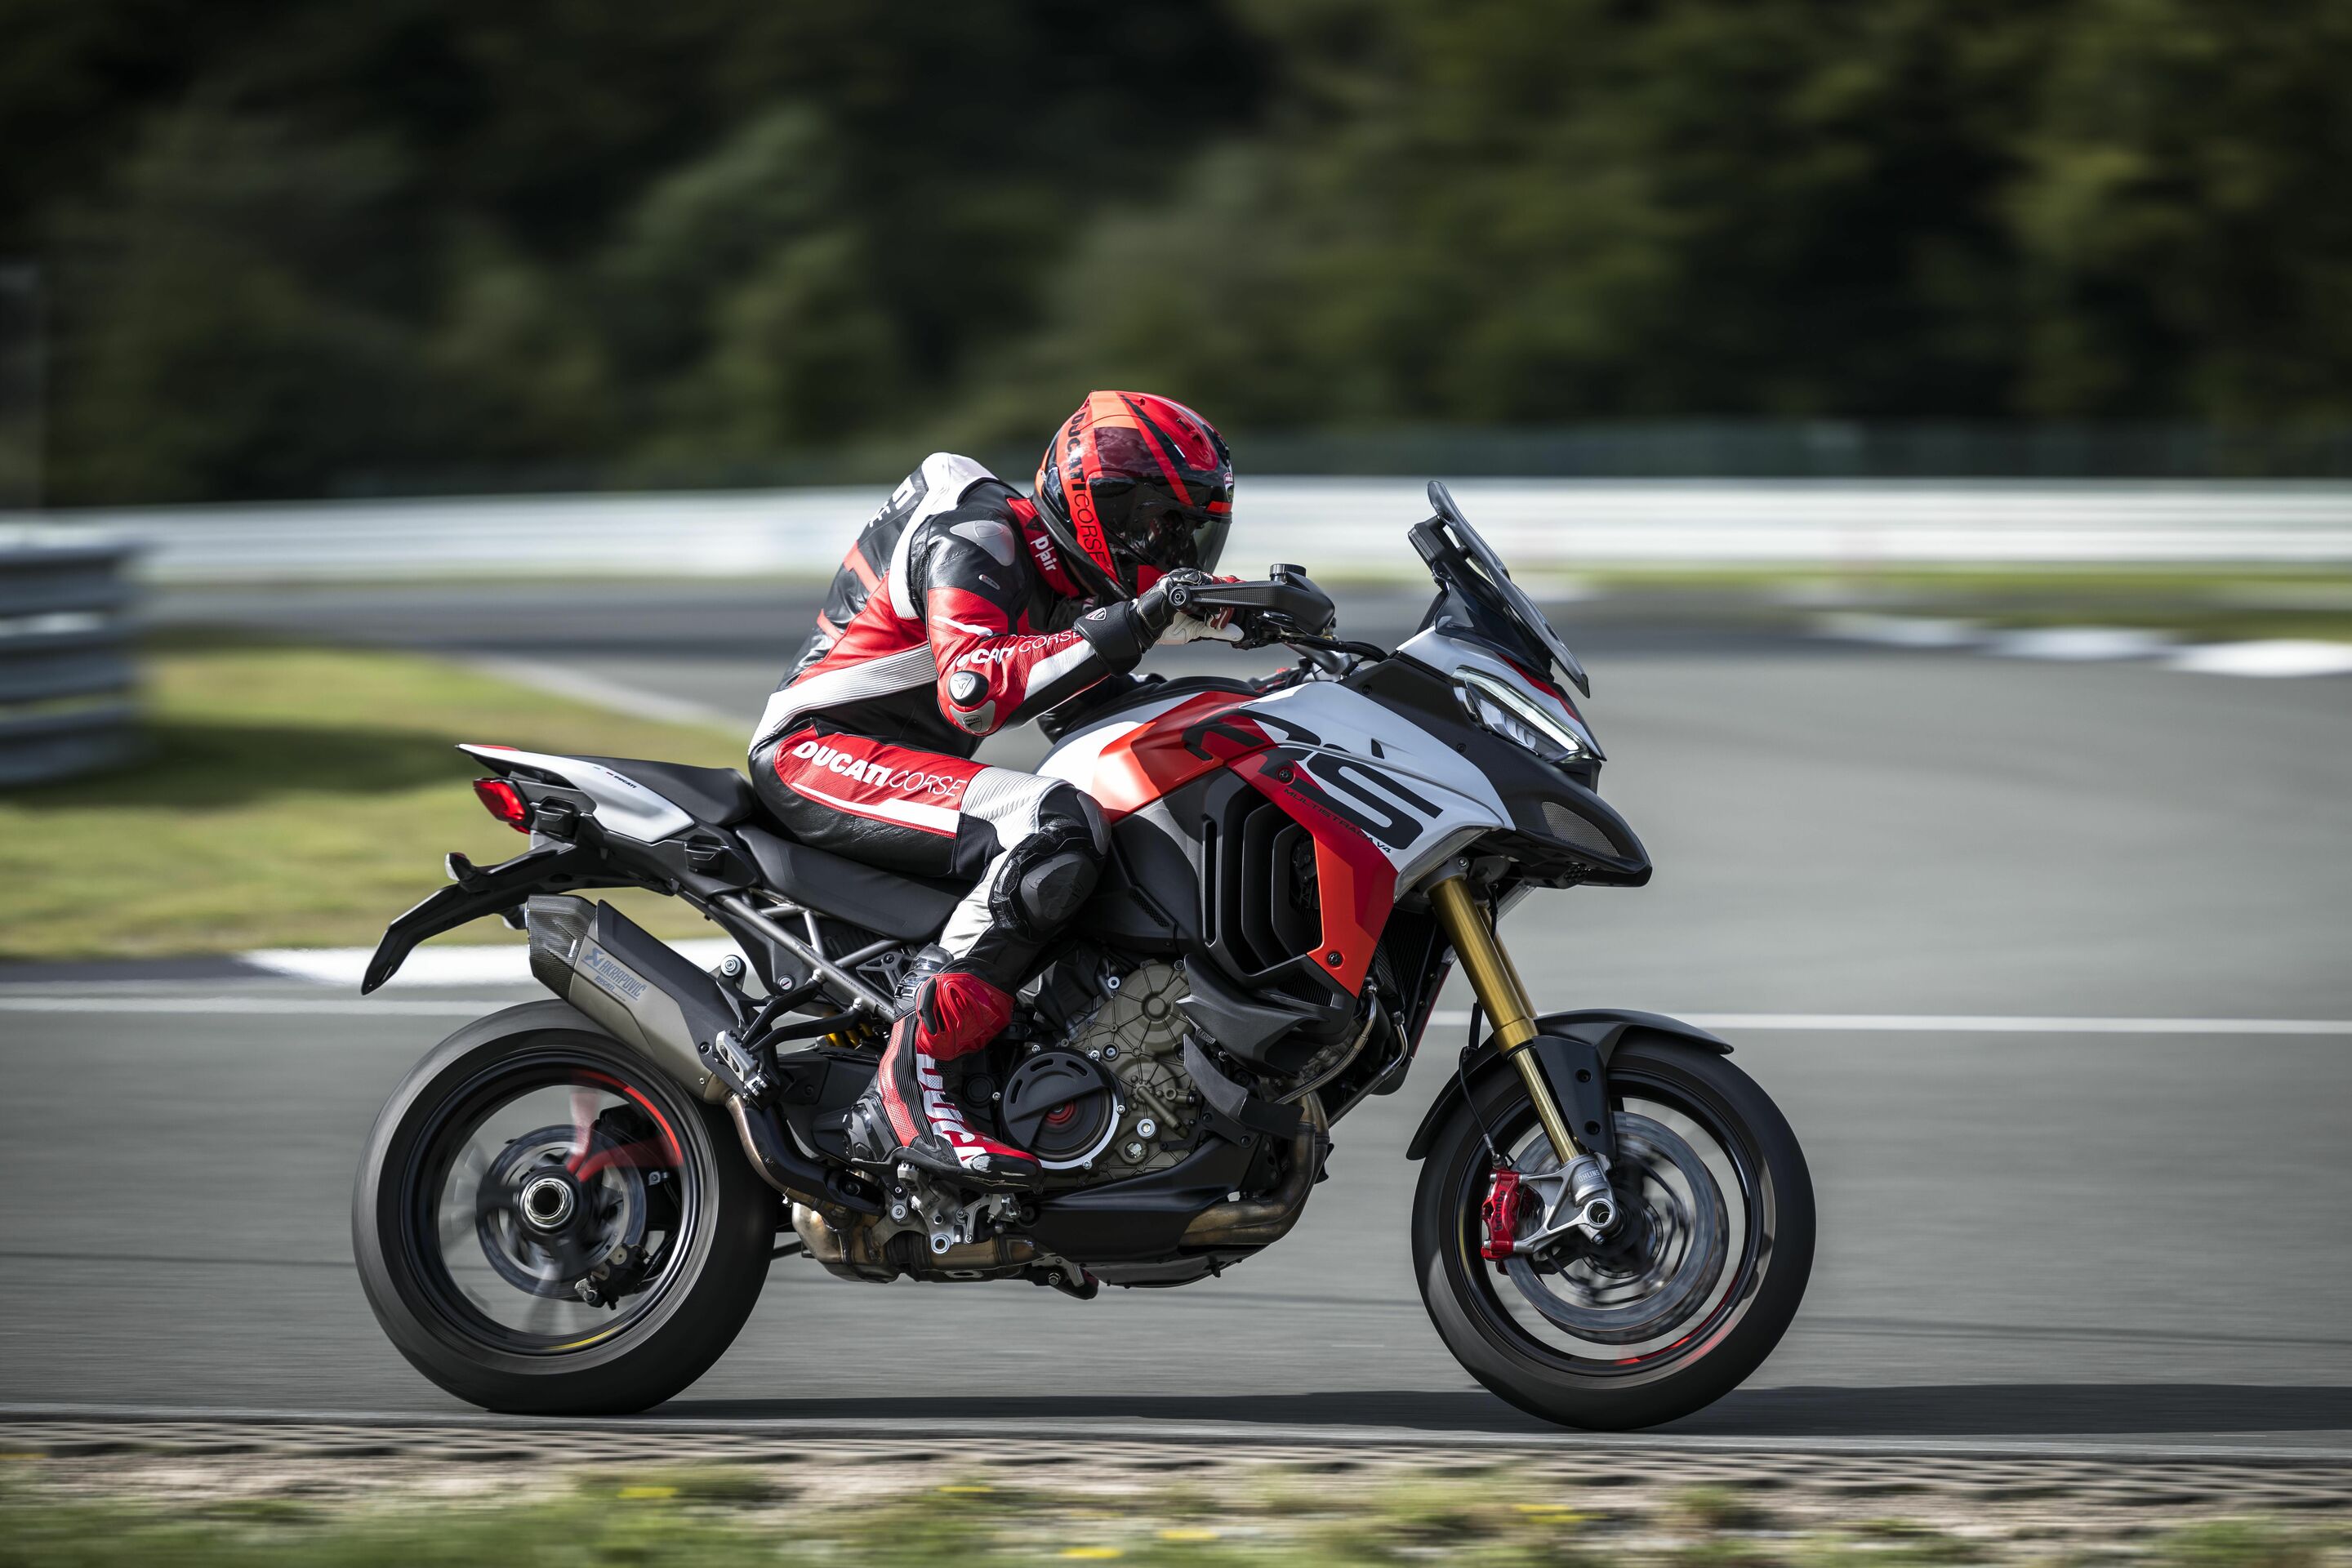 Ducati stabilizes its position in the main markets